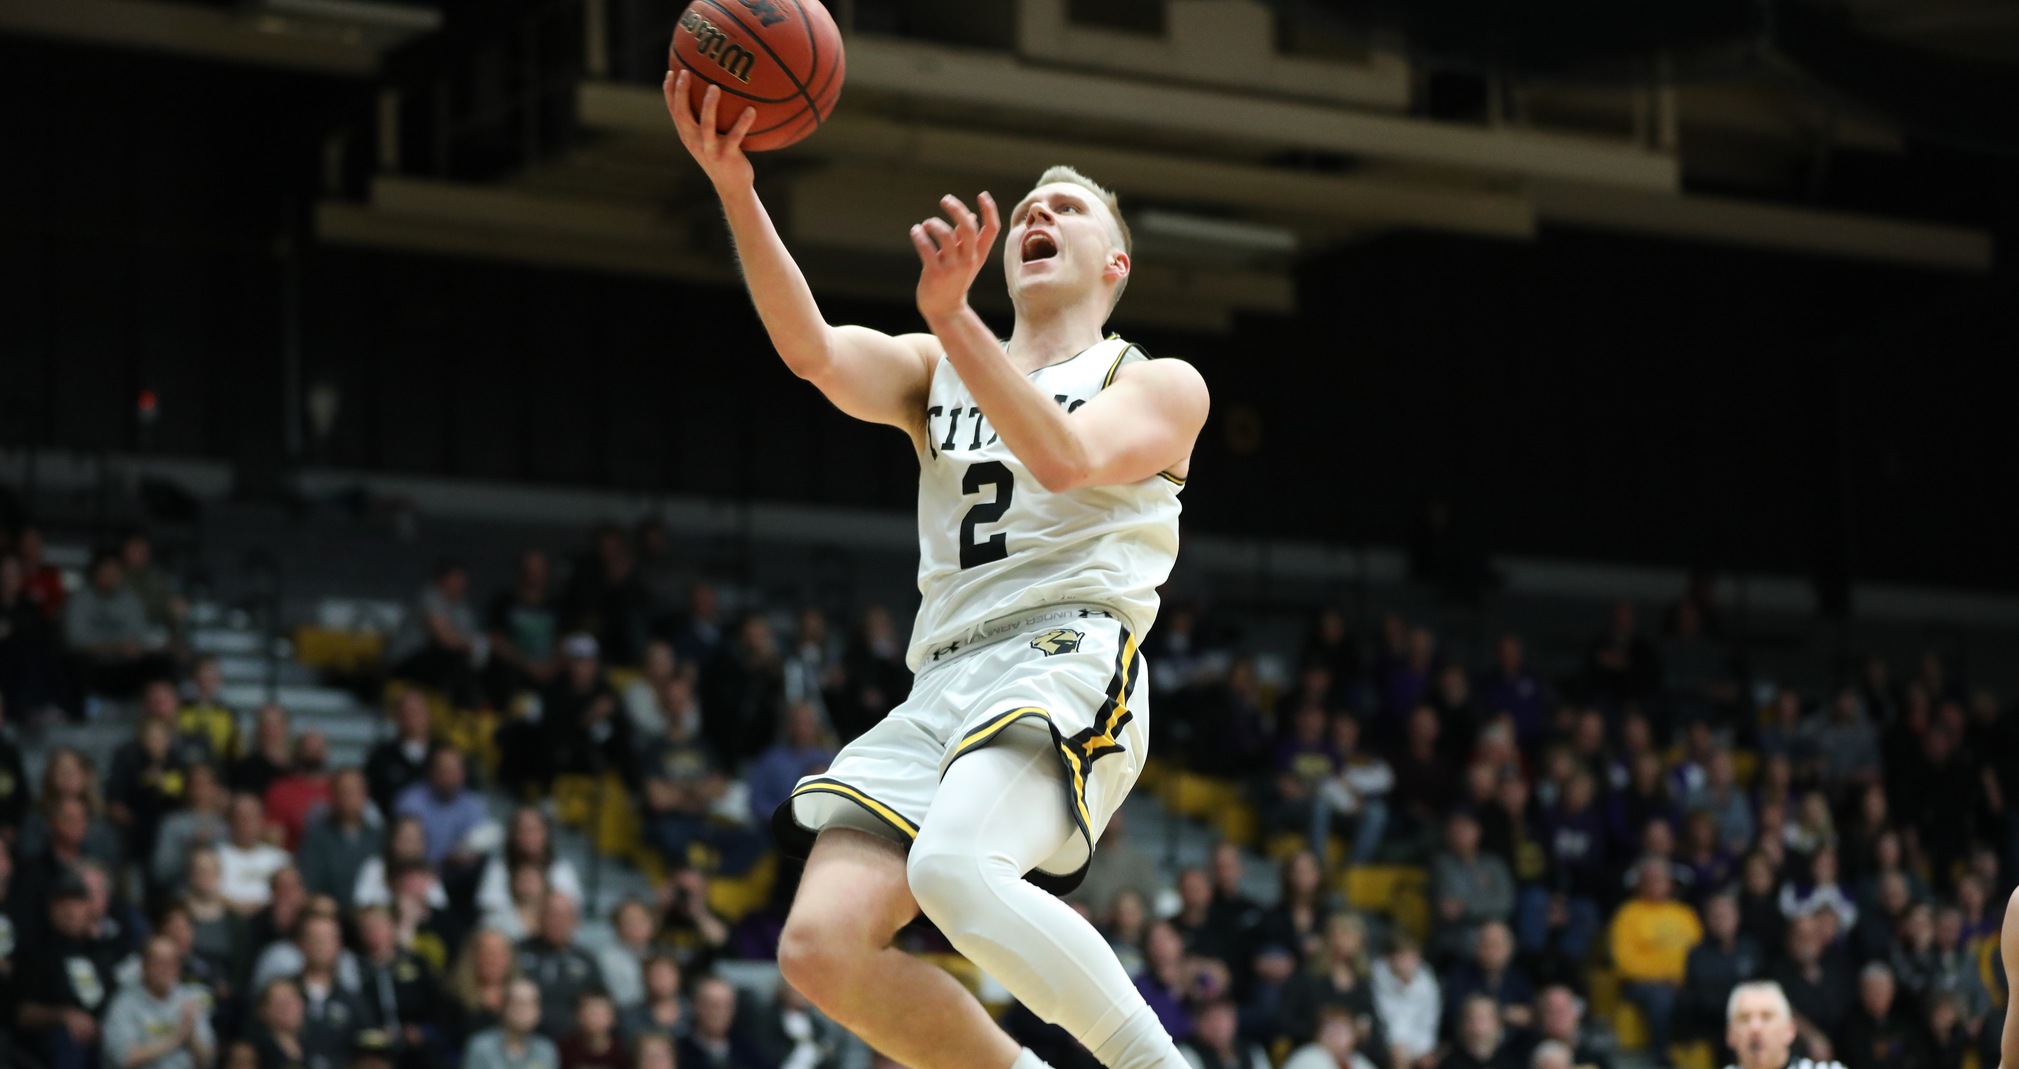 Ben Boots surpassed 1,600 career points with his 19 against UW-Stevens Point.